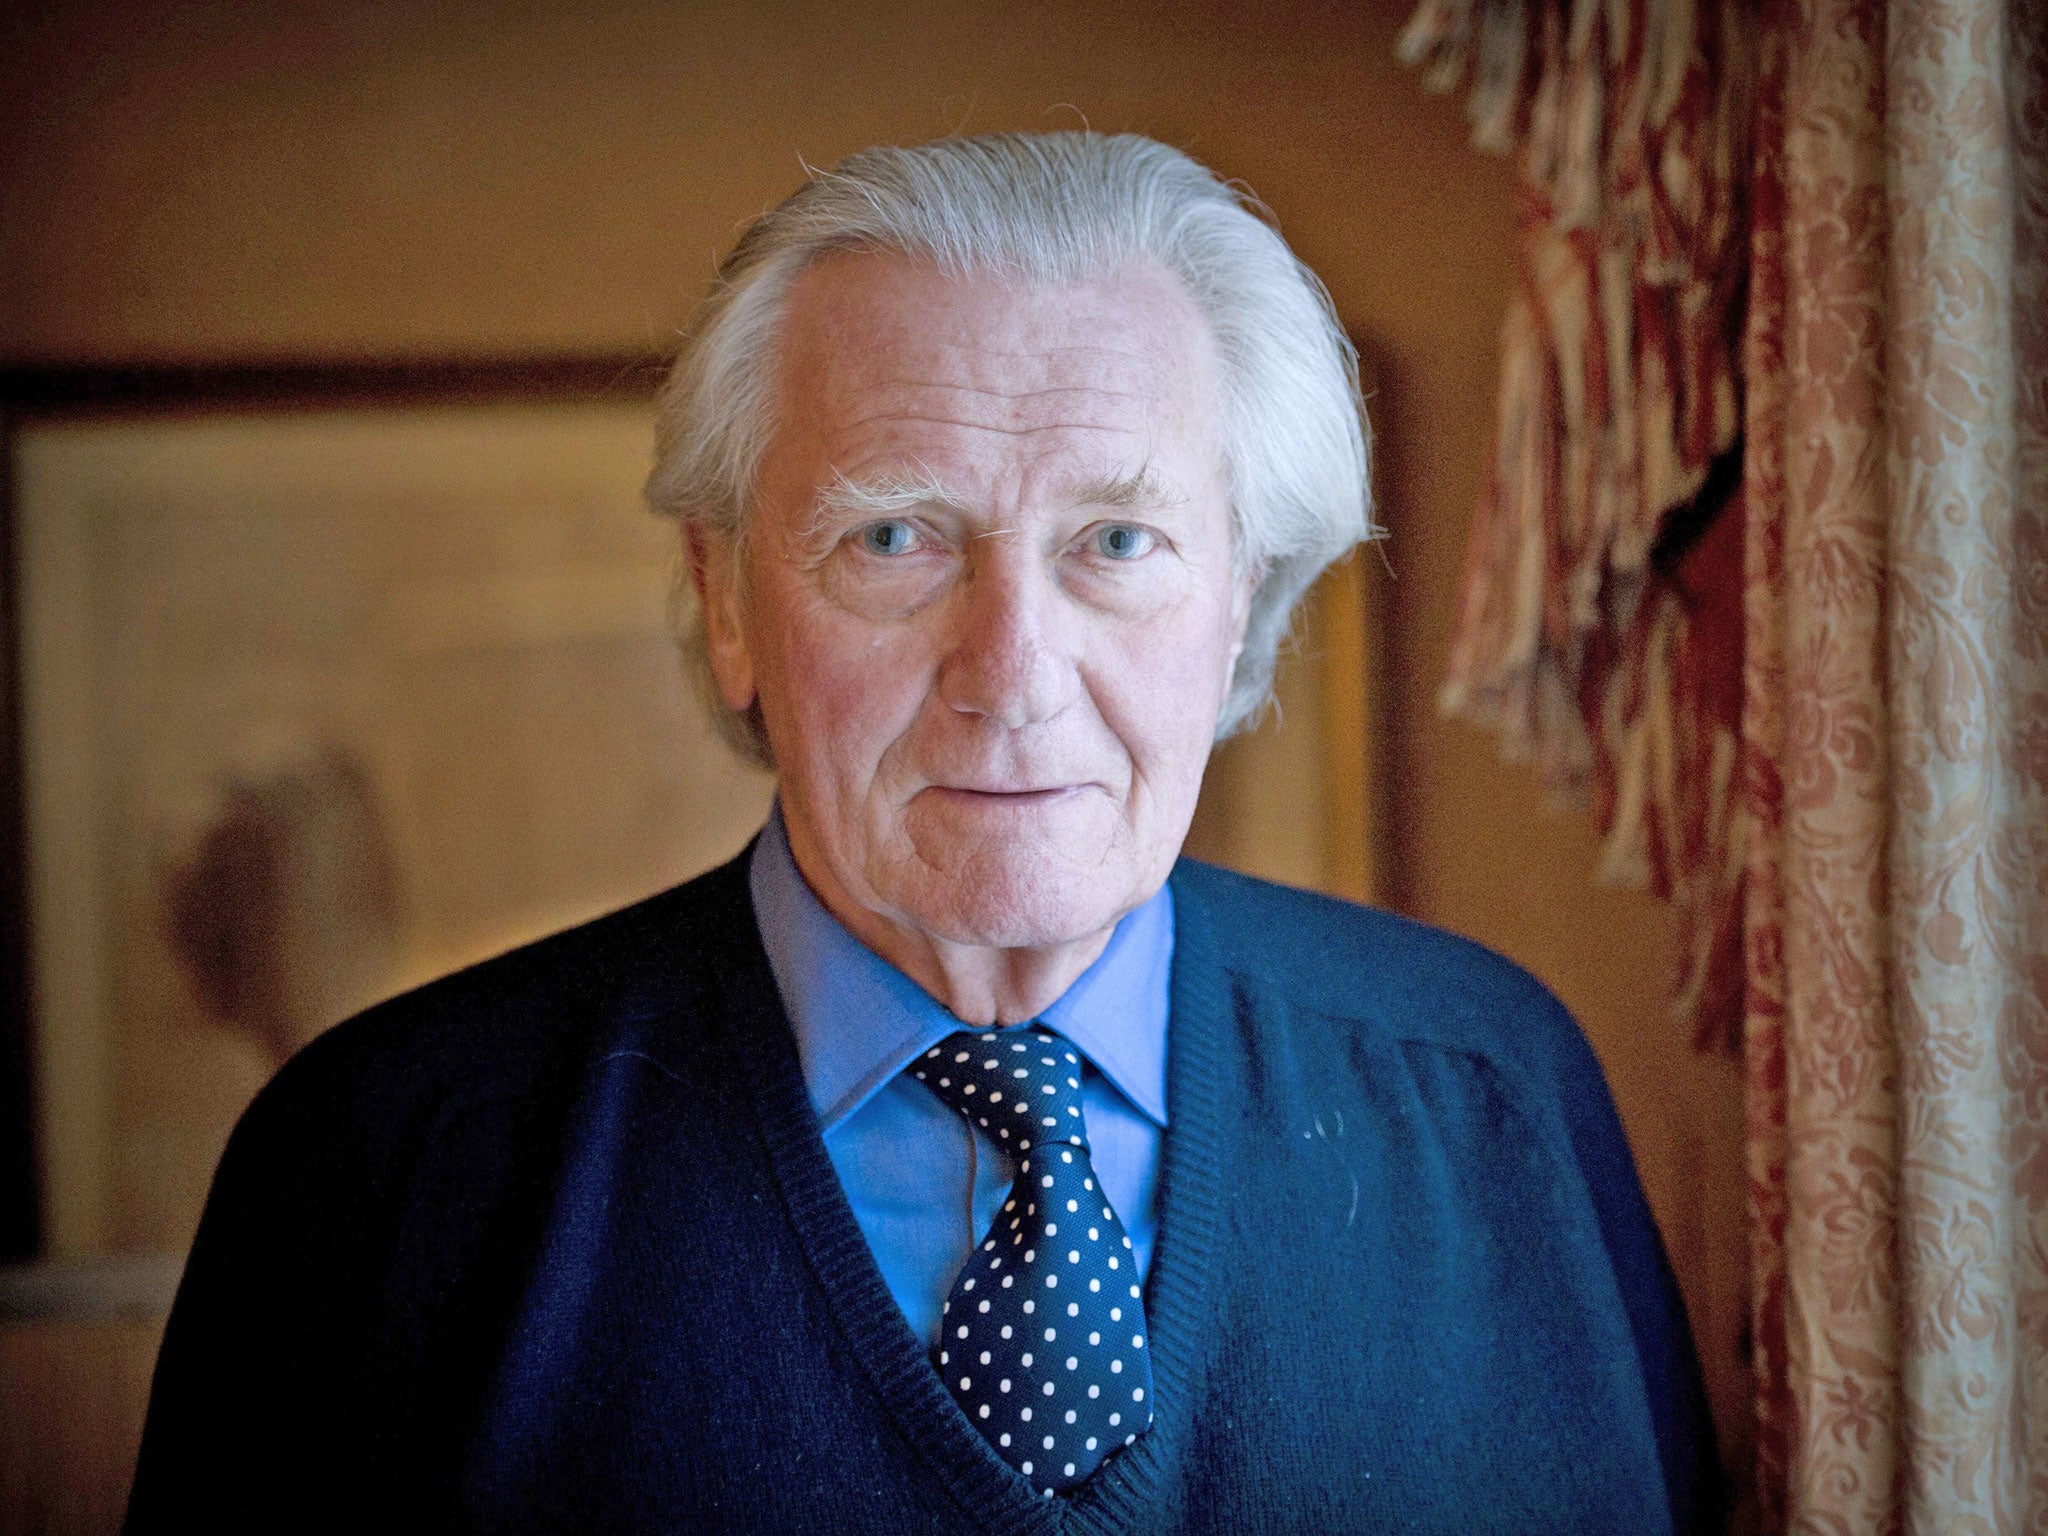 Lord Heseltine has been consulting with George Osborne on
regenerating British cities